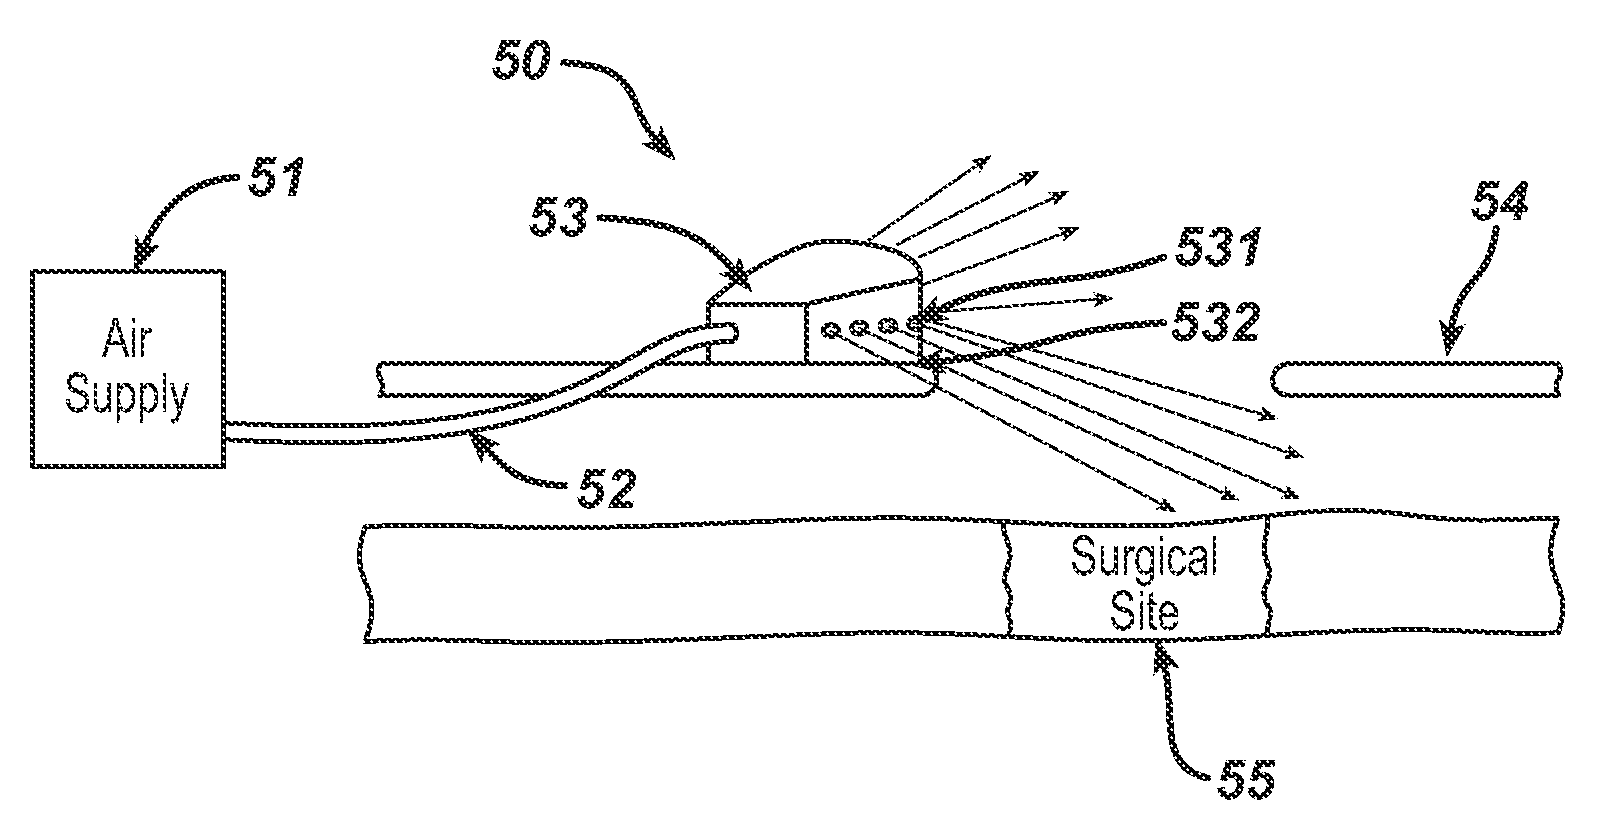 System and method for reducing surgical site infection